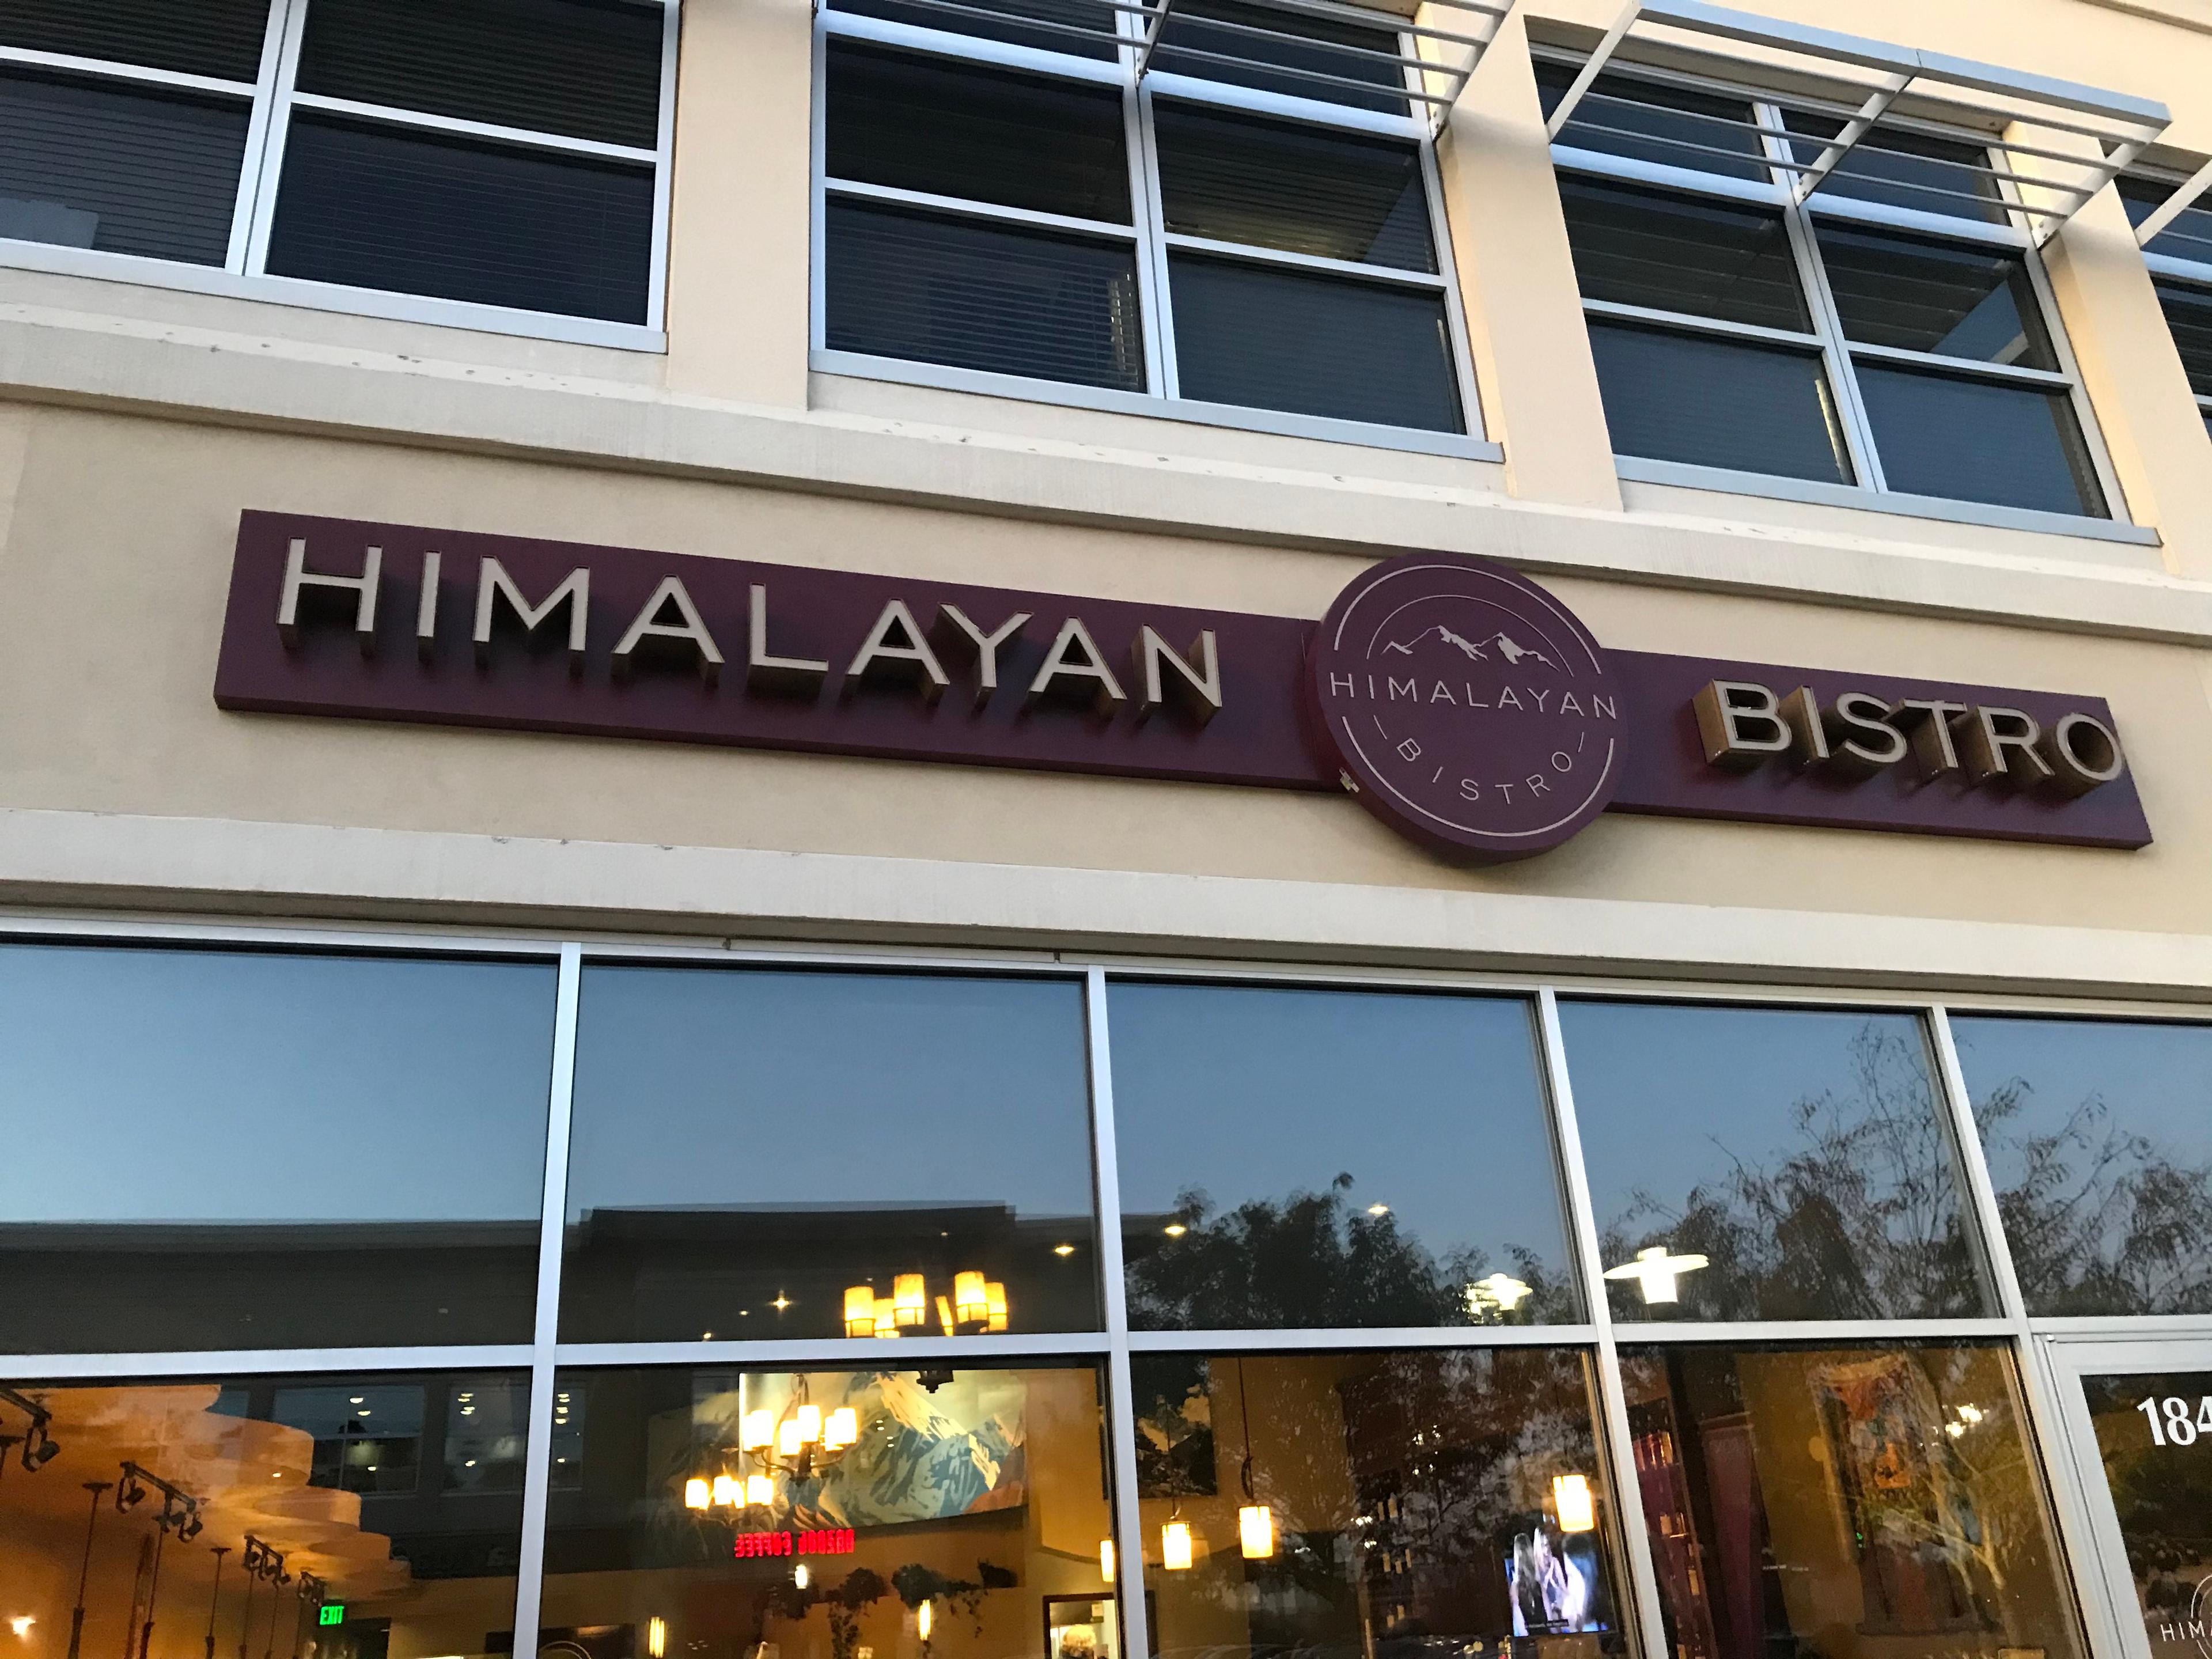 Cover image of this place Himalayan Bistro